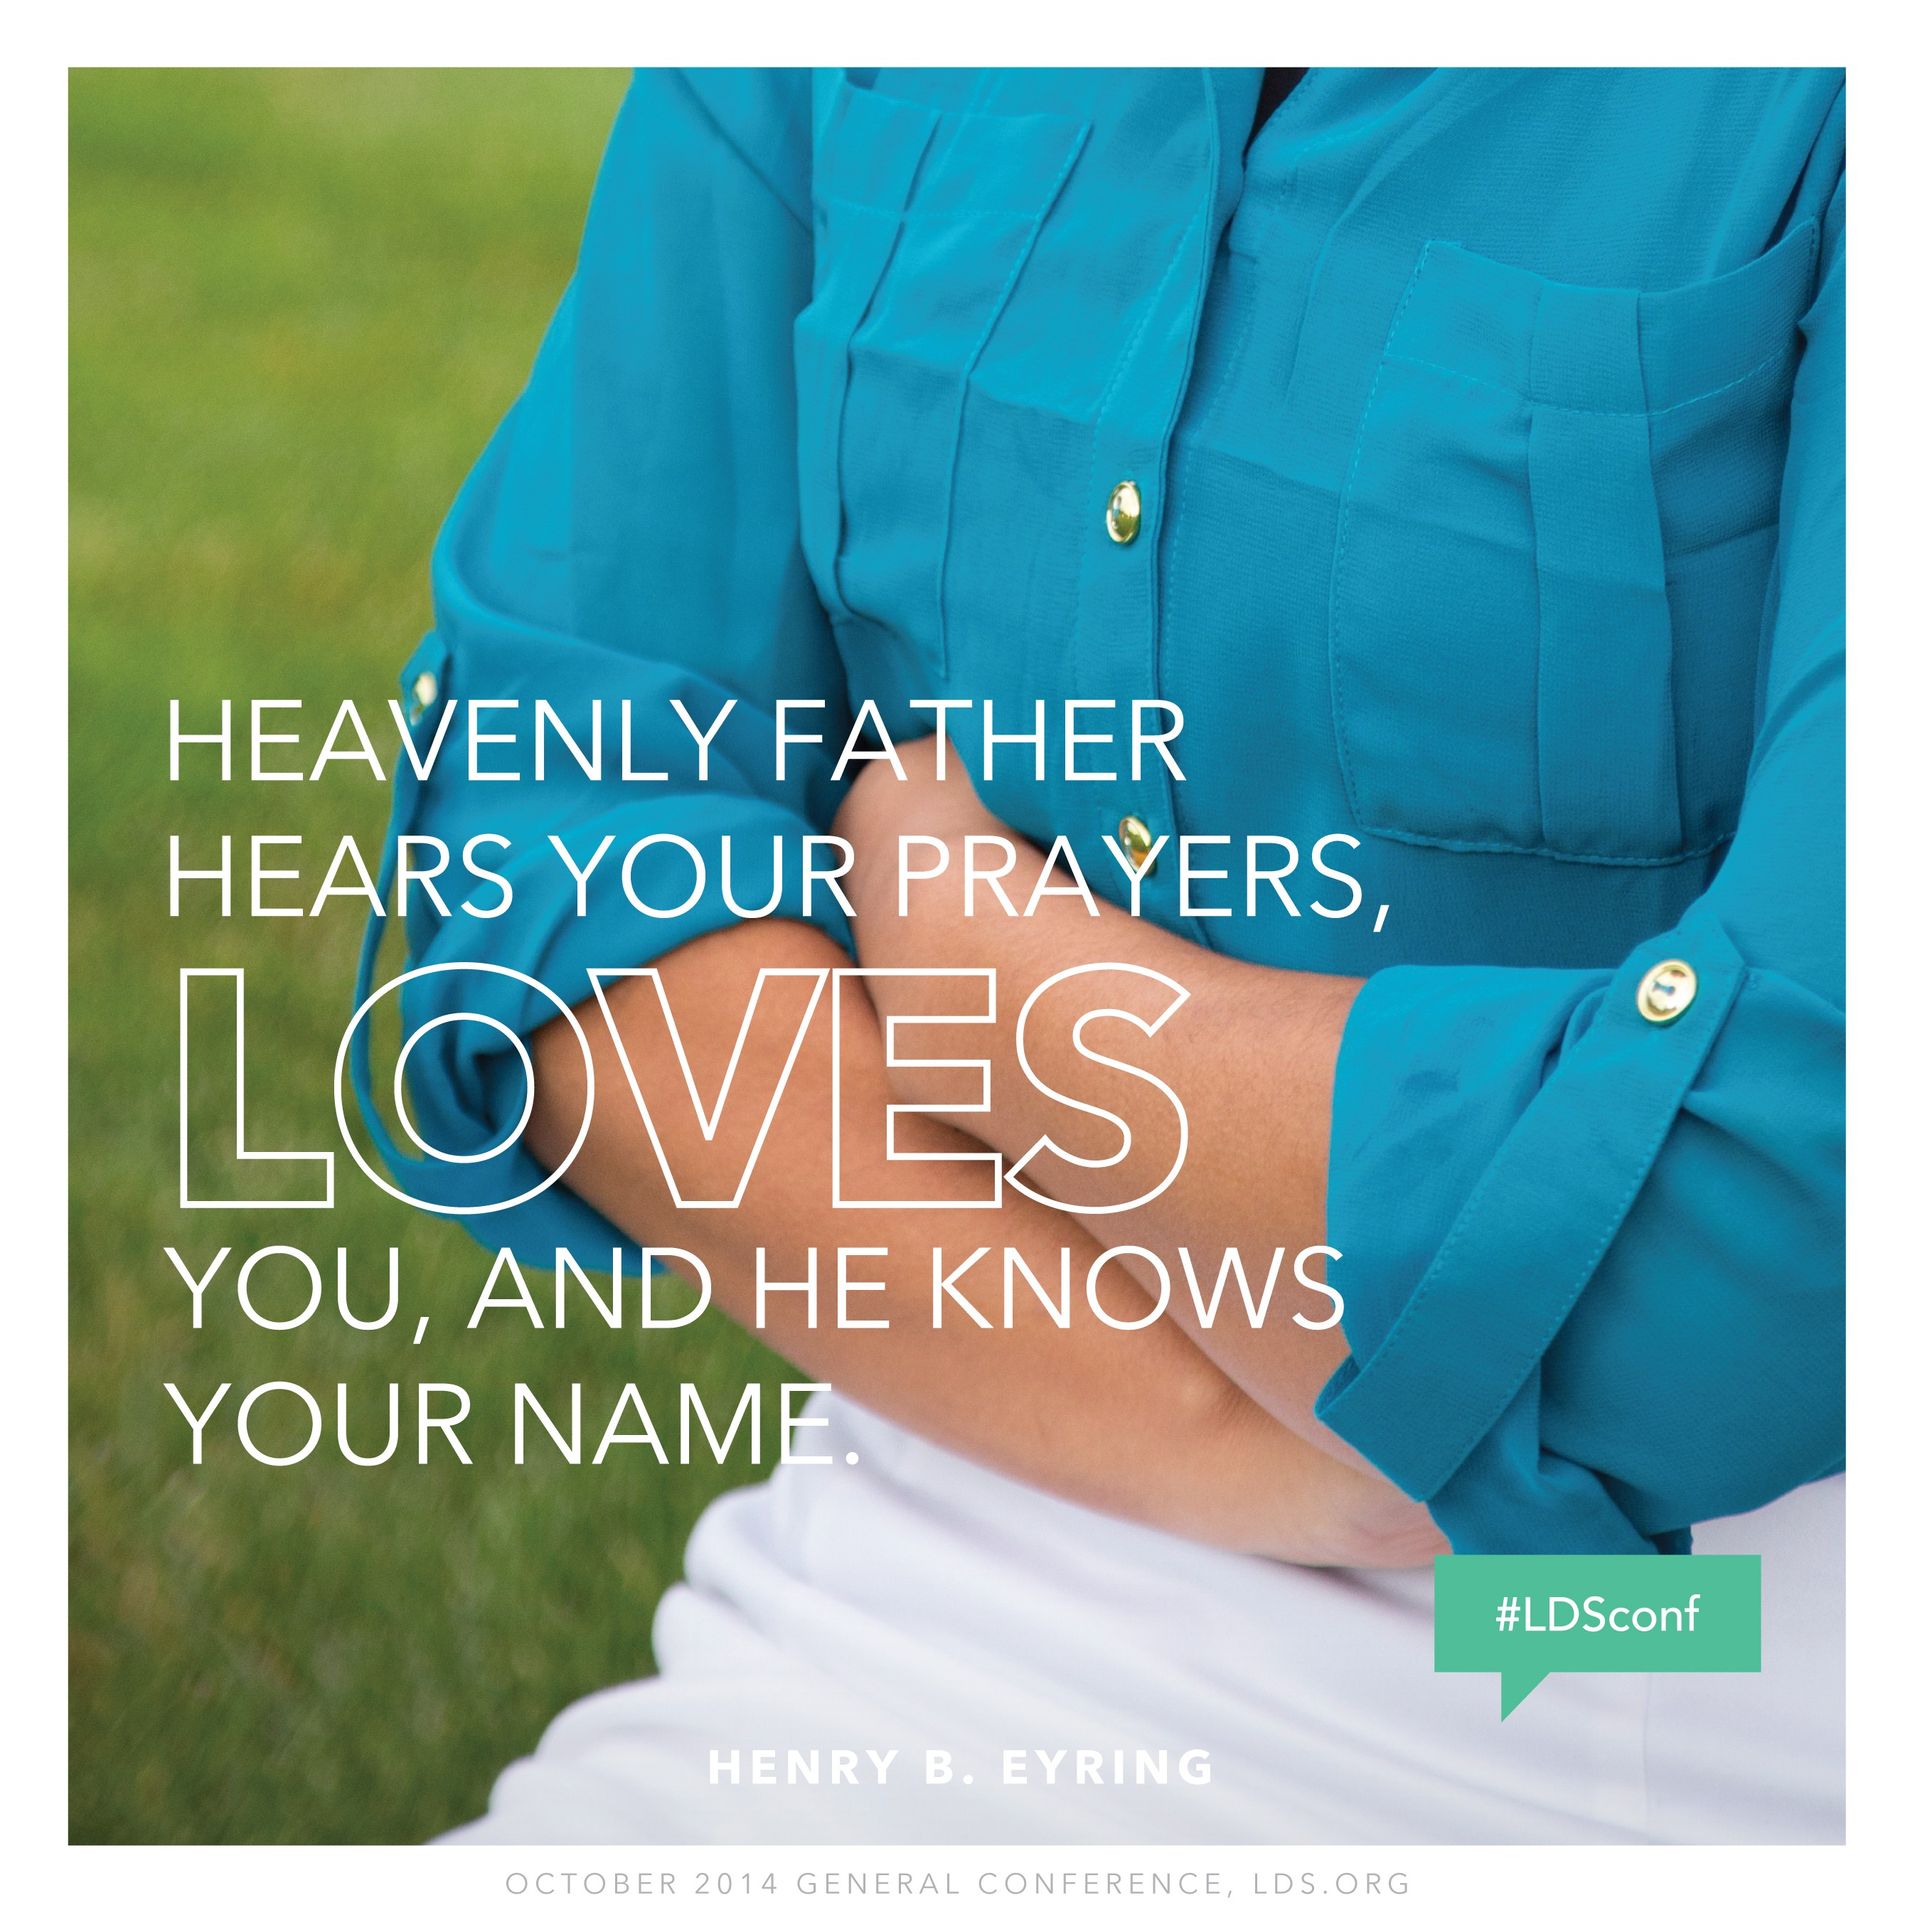 “Heavenly Father hears your prayers, loves you, and He knows your name.”—President Henry B. Eyring, “Continuing Revelation” © undefined ipCode 1.